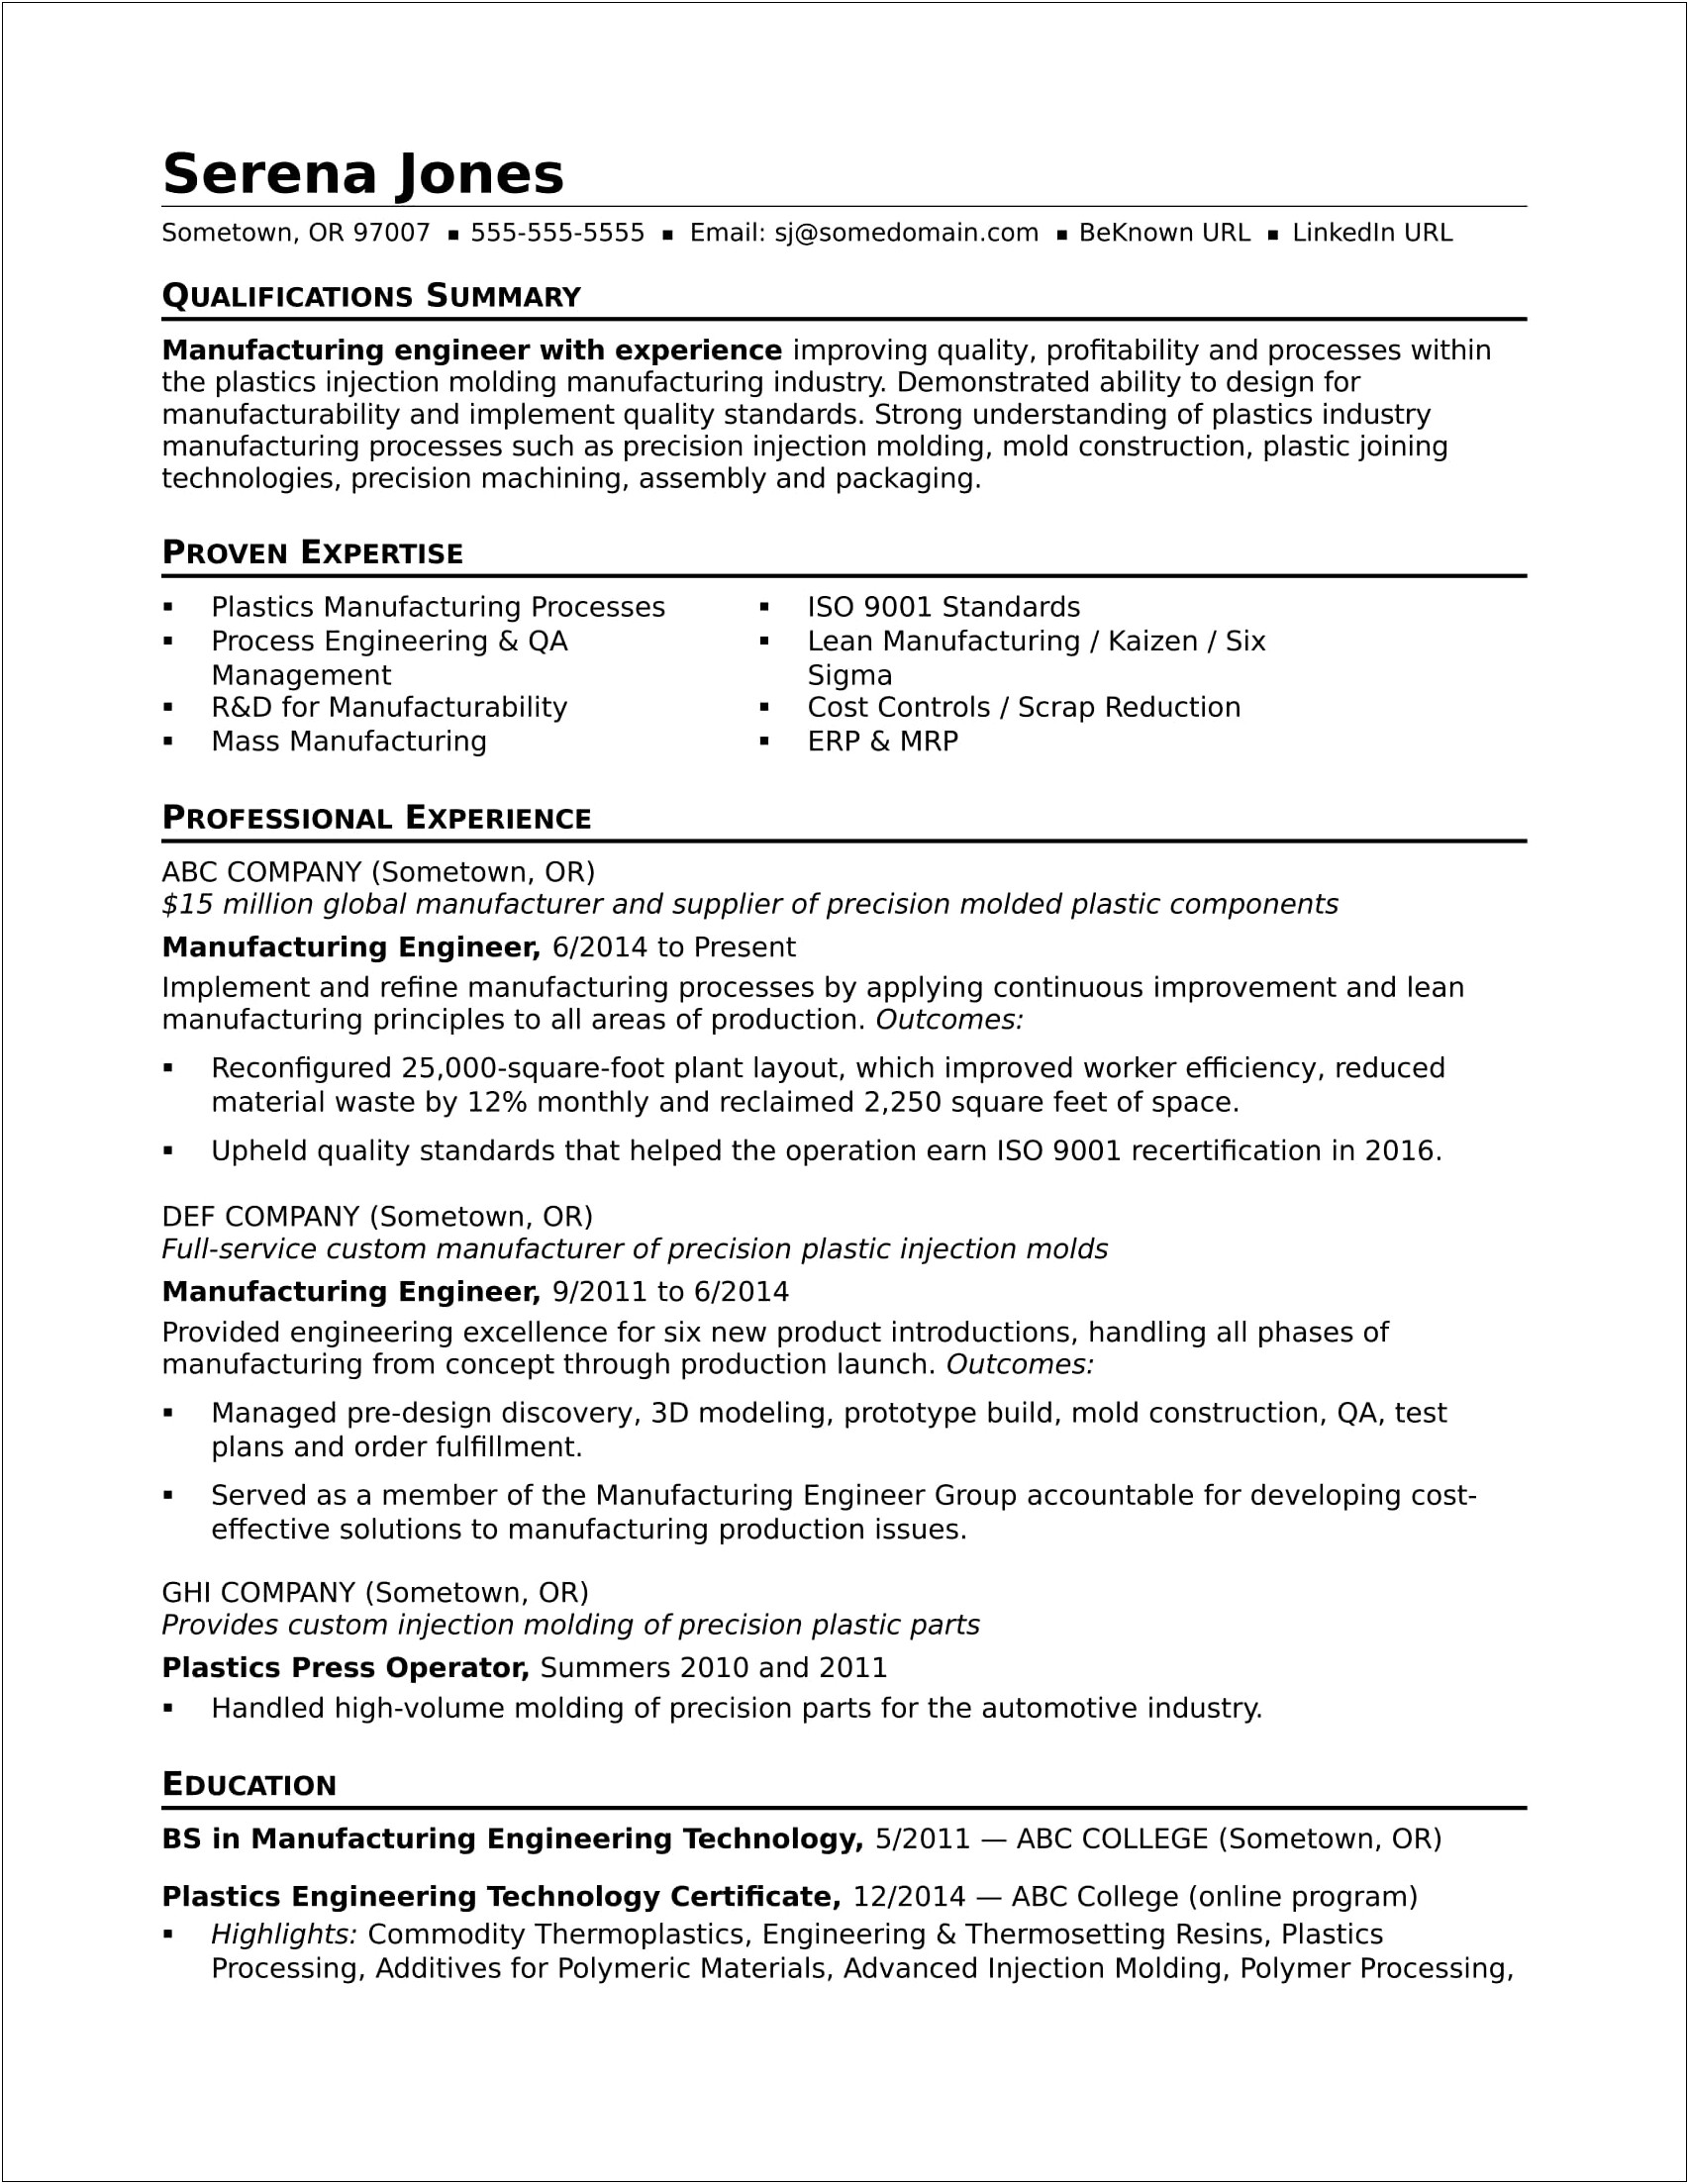 The Best Medical Device Resume Objective